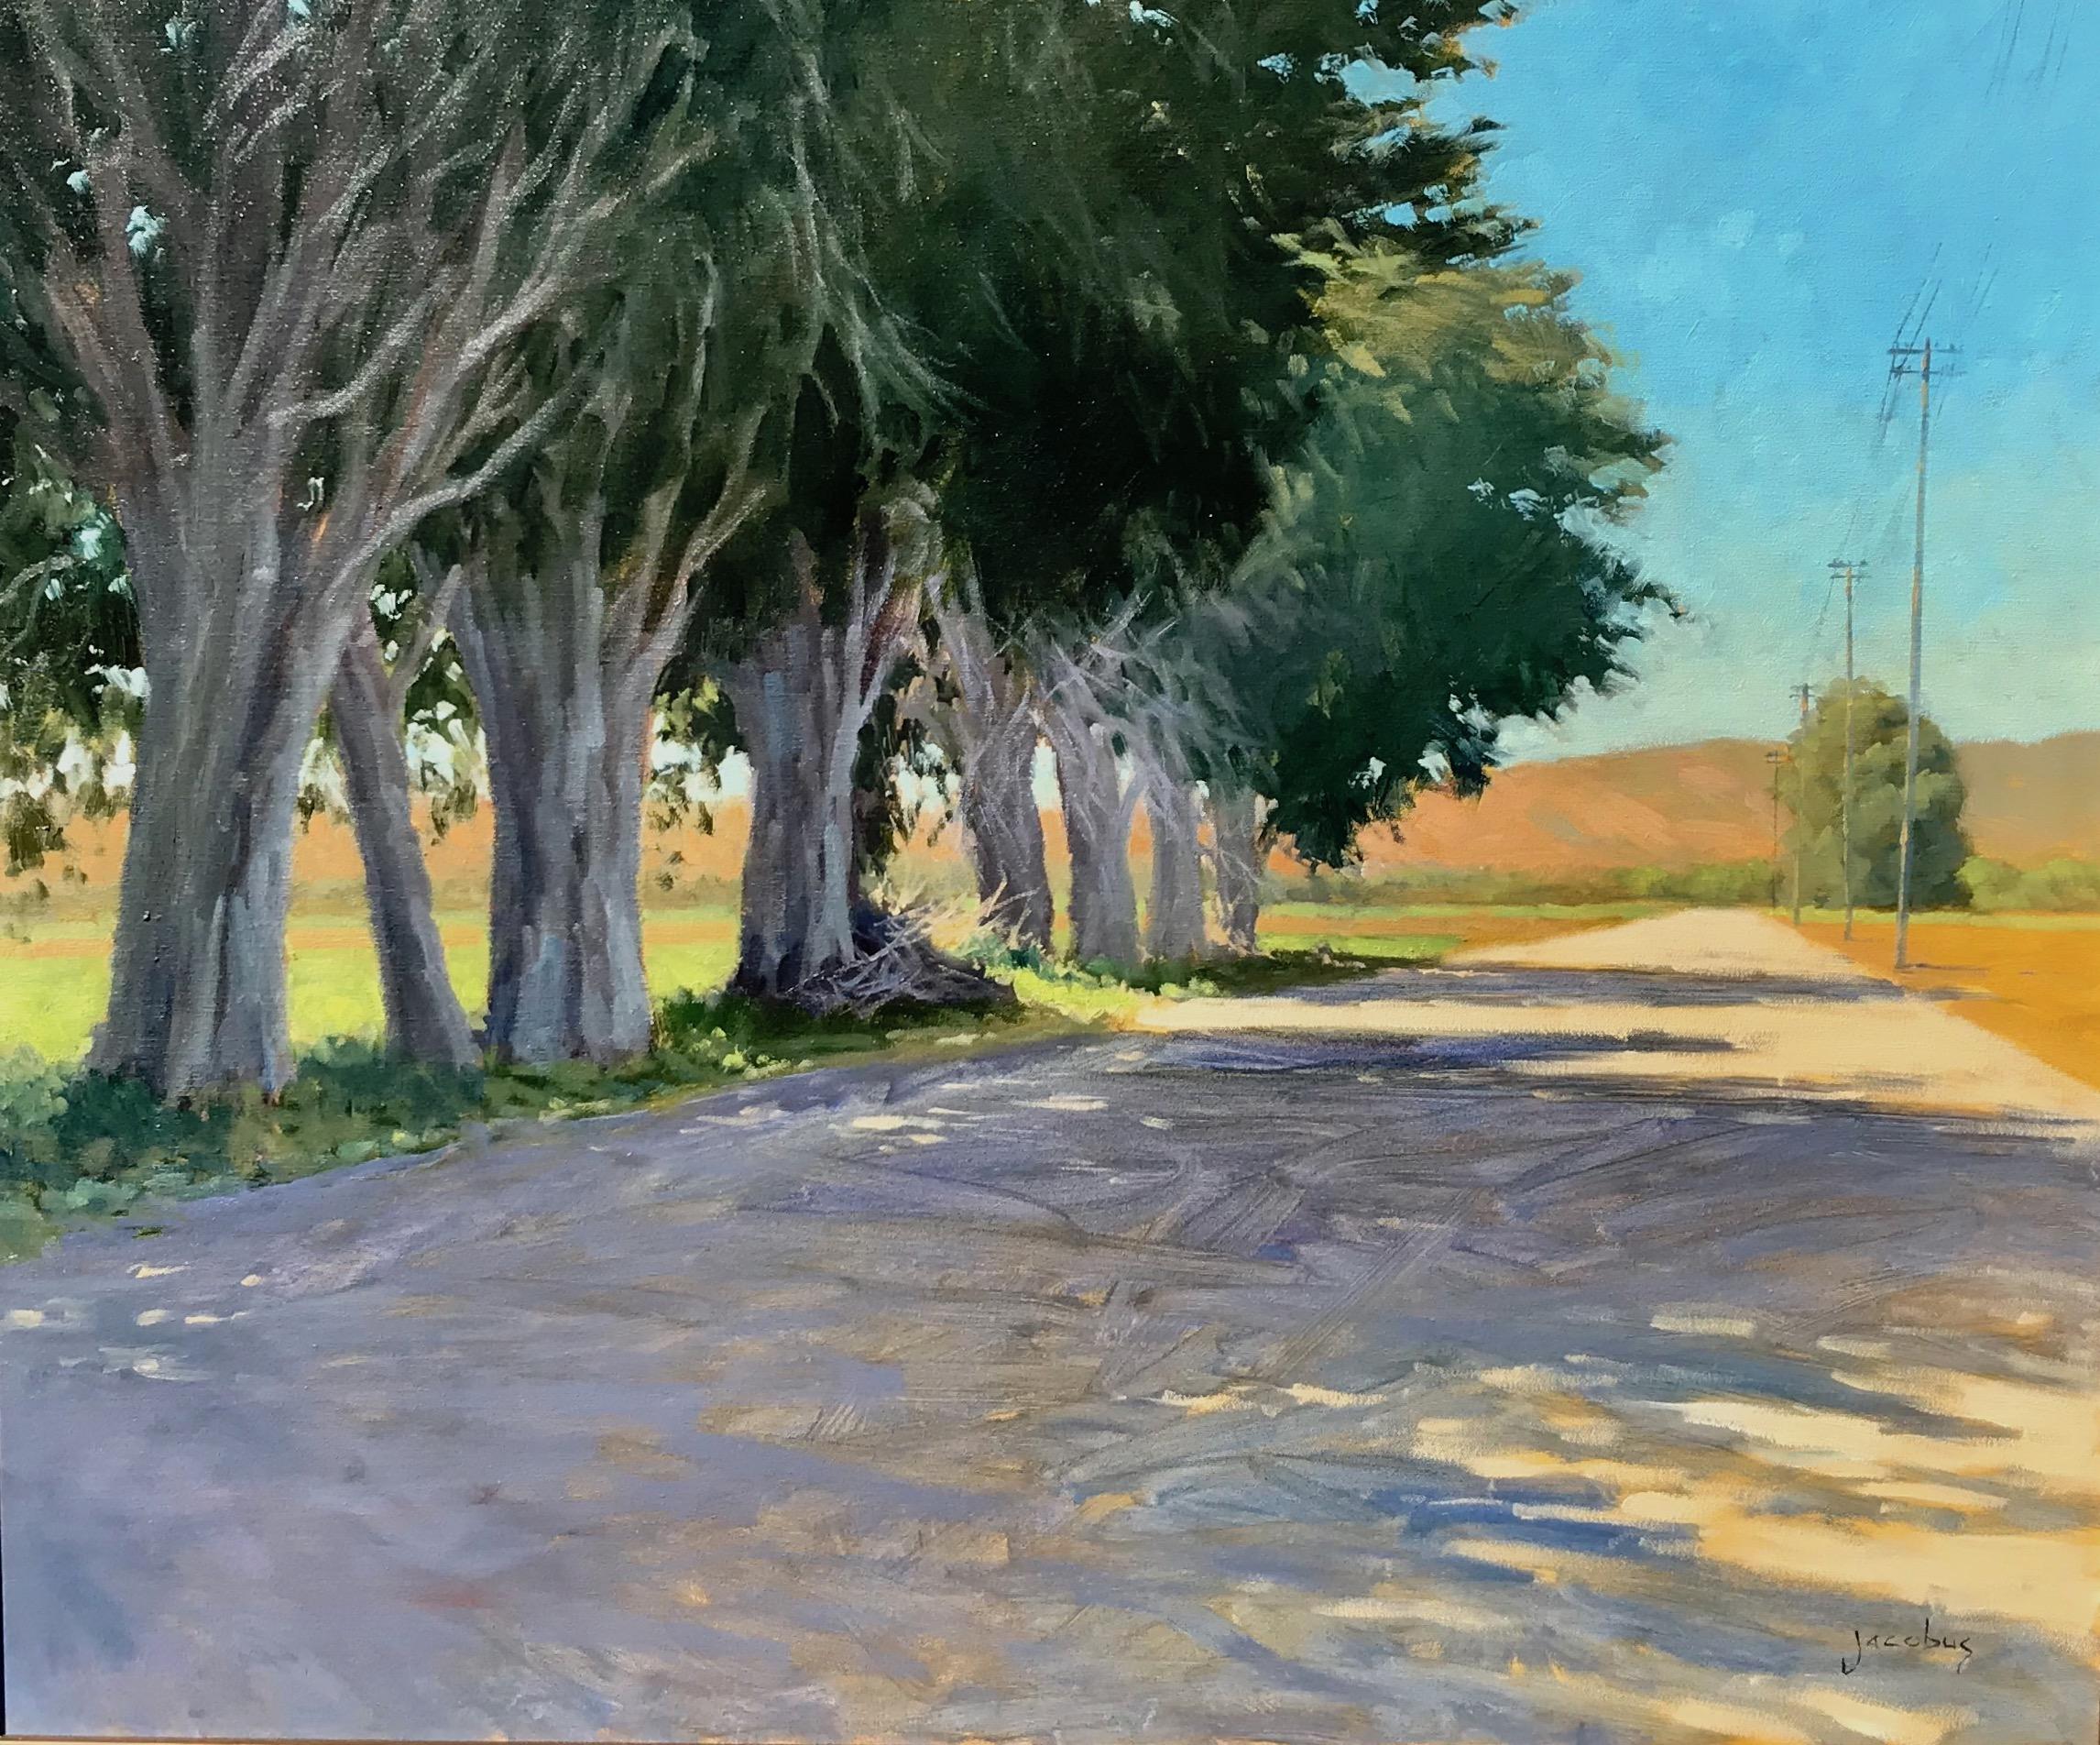 Jacobus Baas Landscape Painting - "Midday Shadows" Central California Plein Air Painting